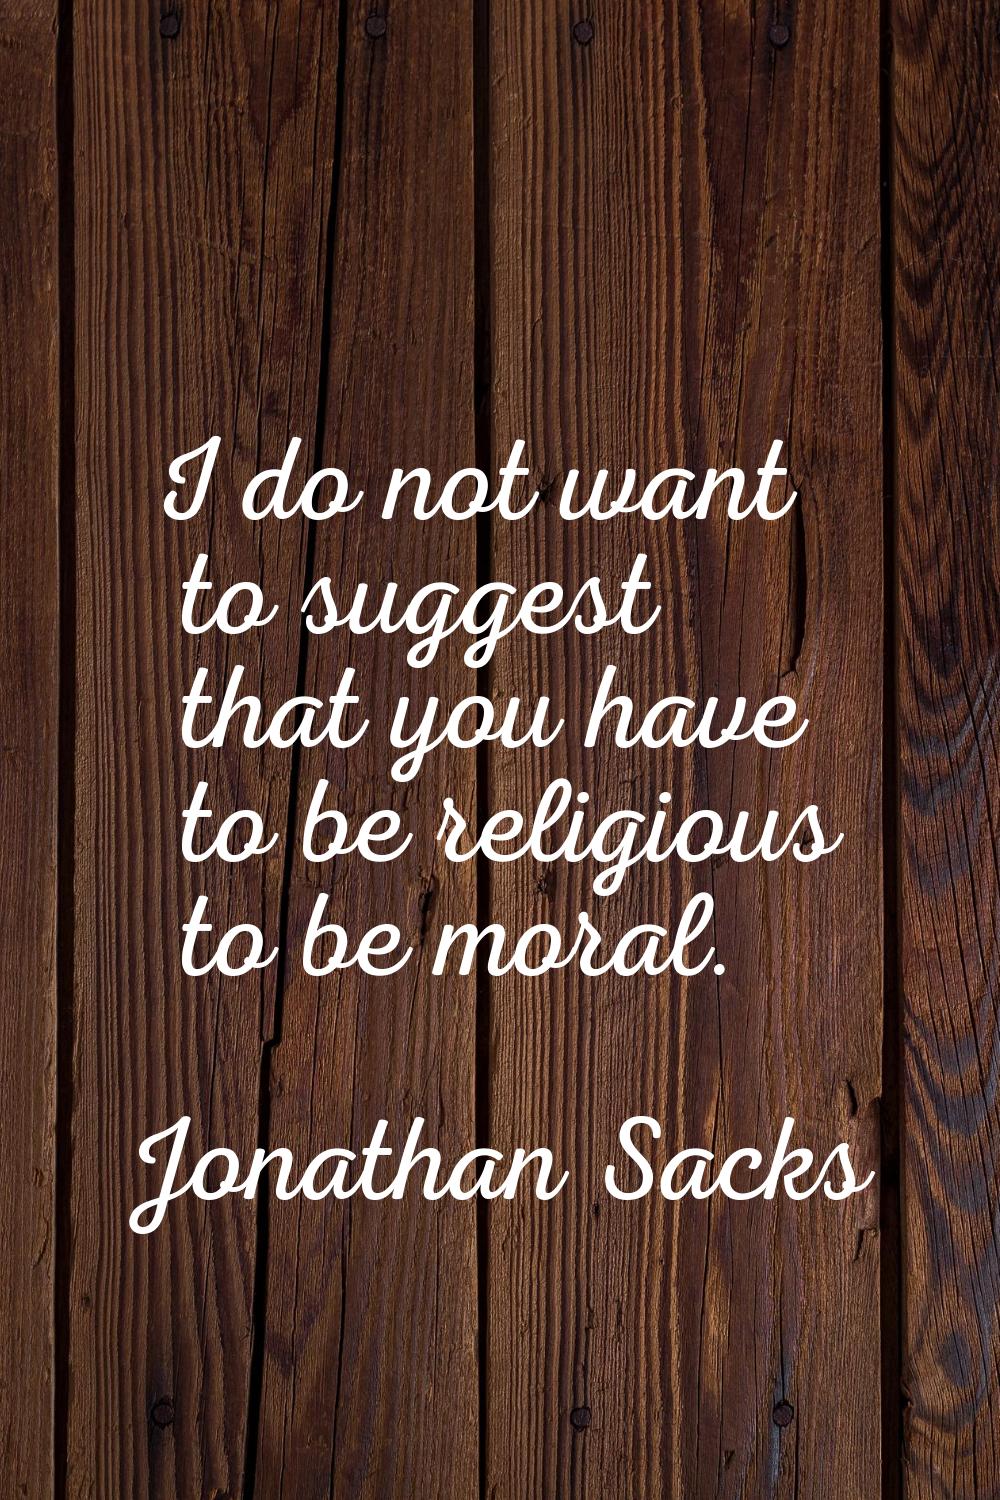 I do not want to suggest that you have to be religious to be moral.